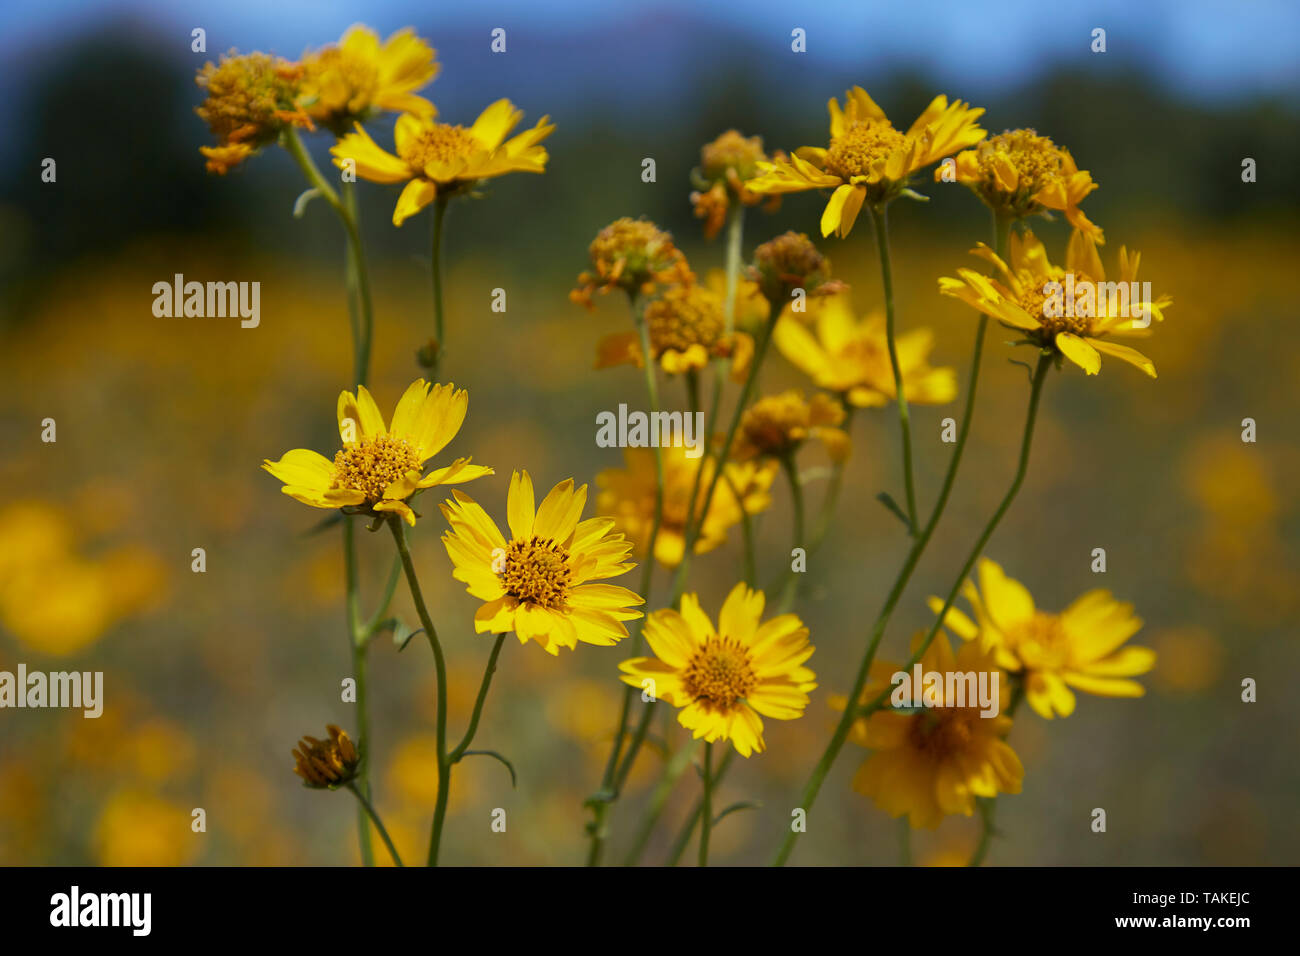 Close up on yellow flowers growing in field, with blurry background. Stock Photo